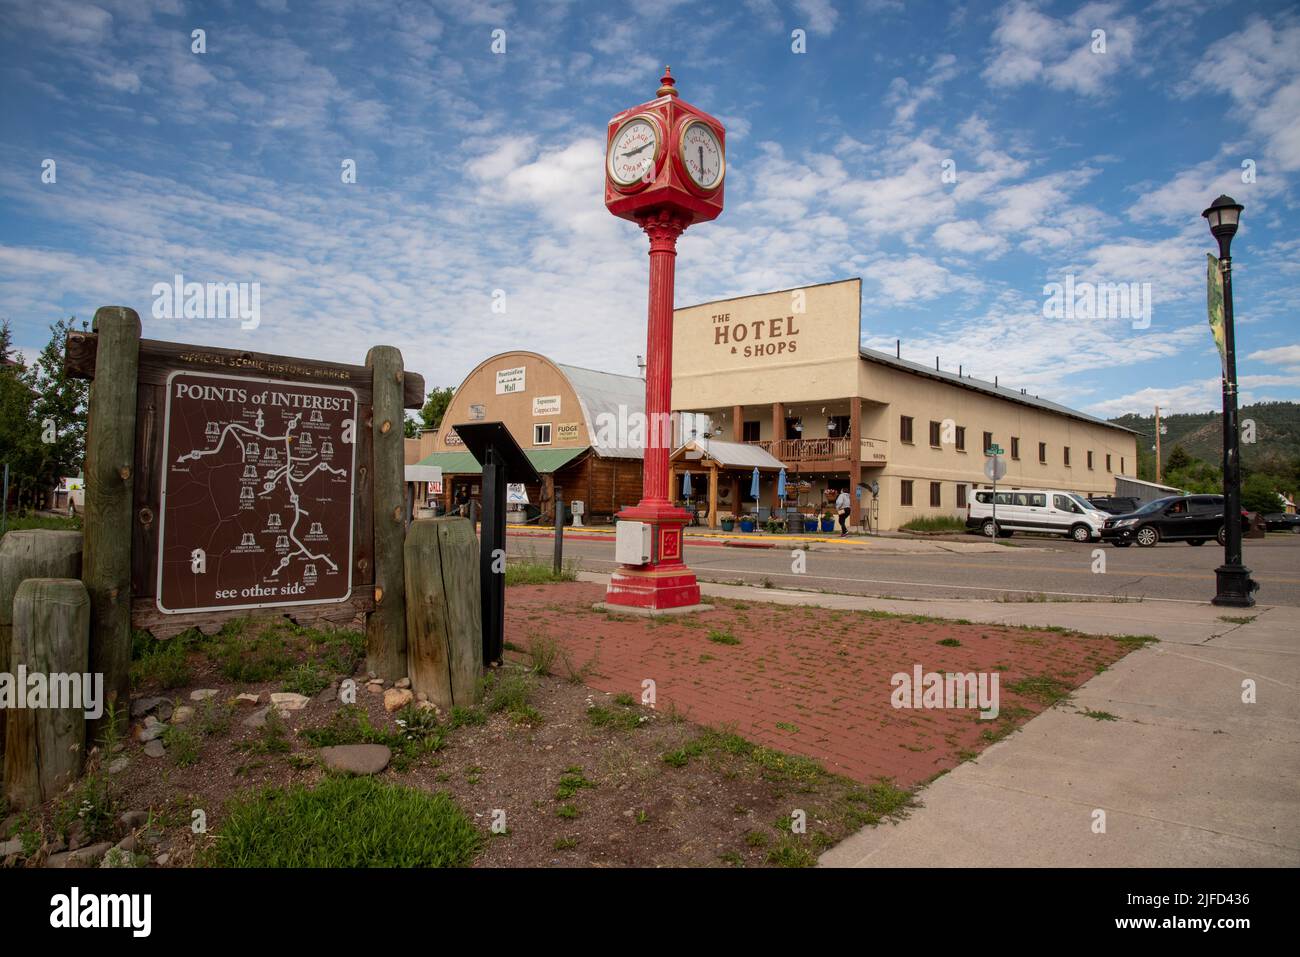 Downtown Chama, New Mexico, looking across a sign marking points of interest, a bright red pedestal clock and The Hotel and Shops. Stock Photo